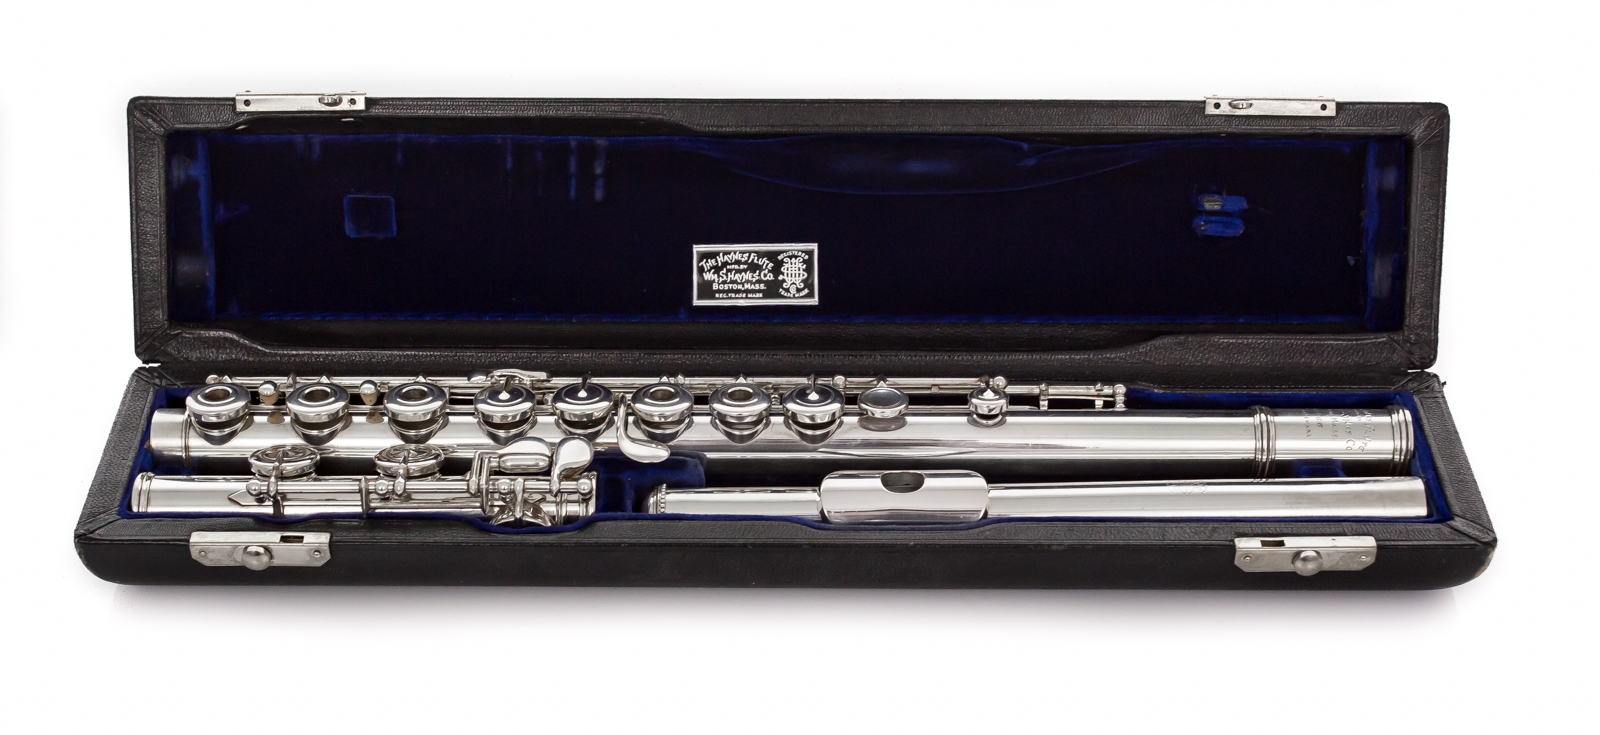 Cundy bettoney flute serial numbers free